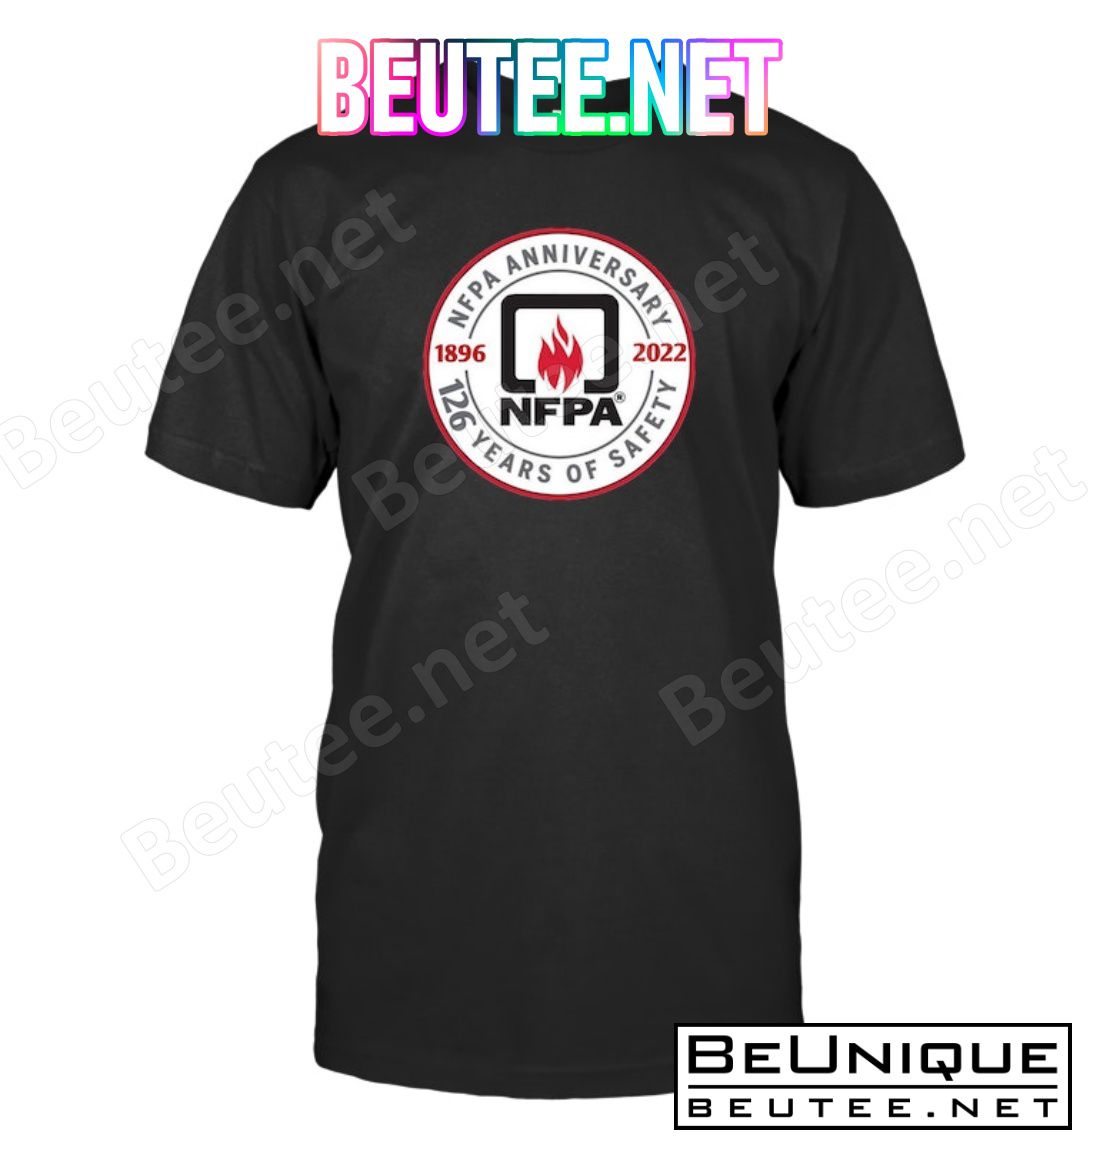 Nfpa Anniversary 1896-2022 126 Years Of Safety Logo Shirt